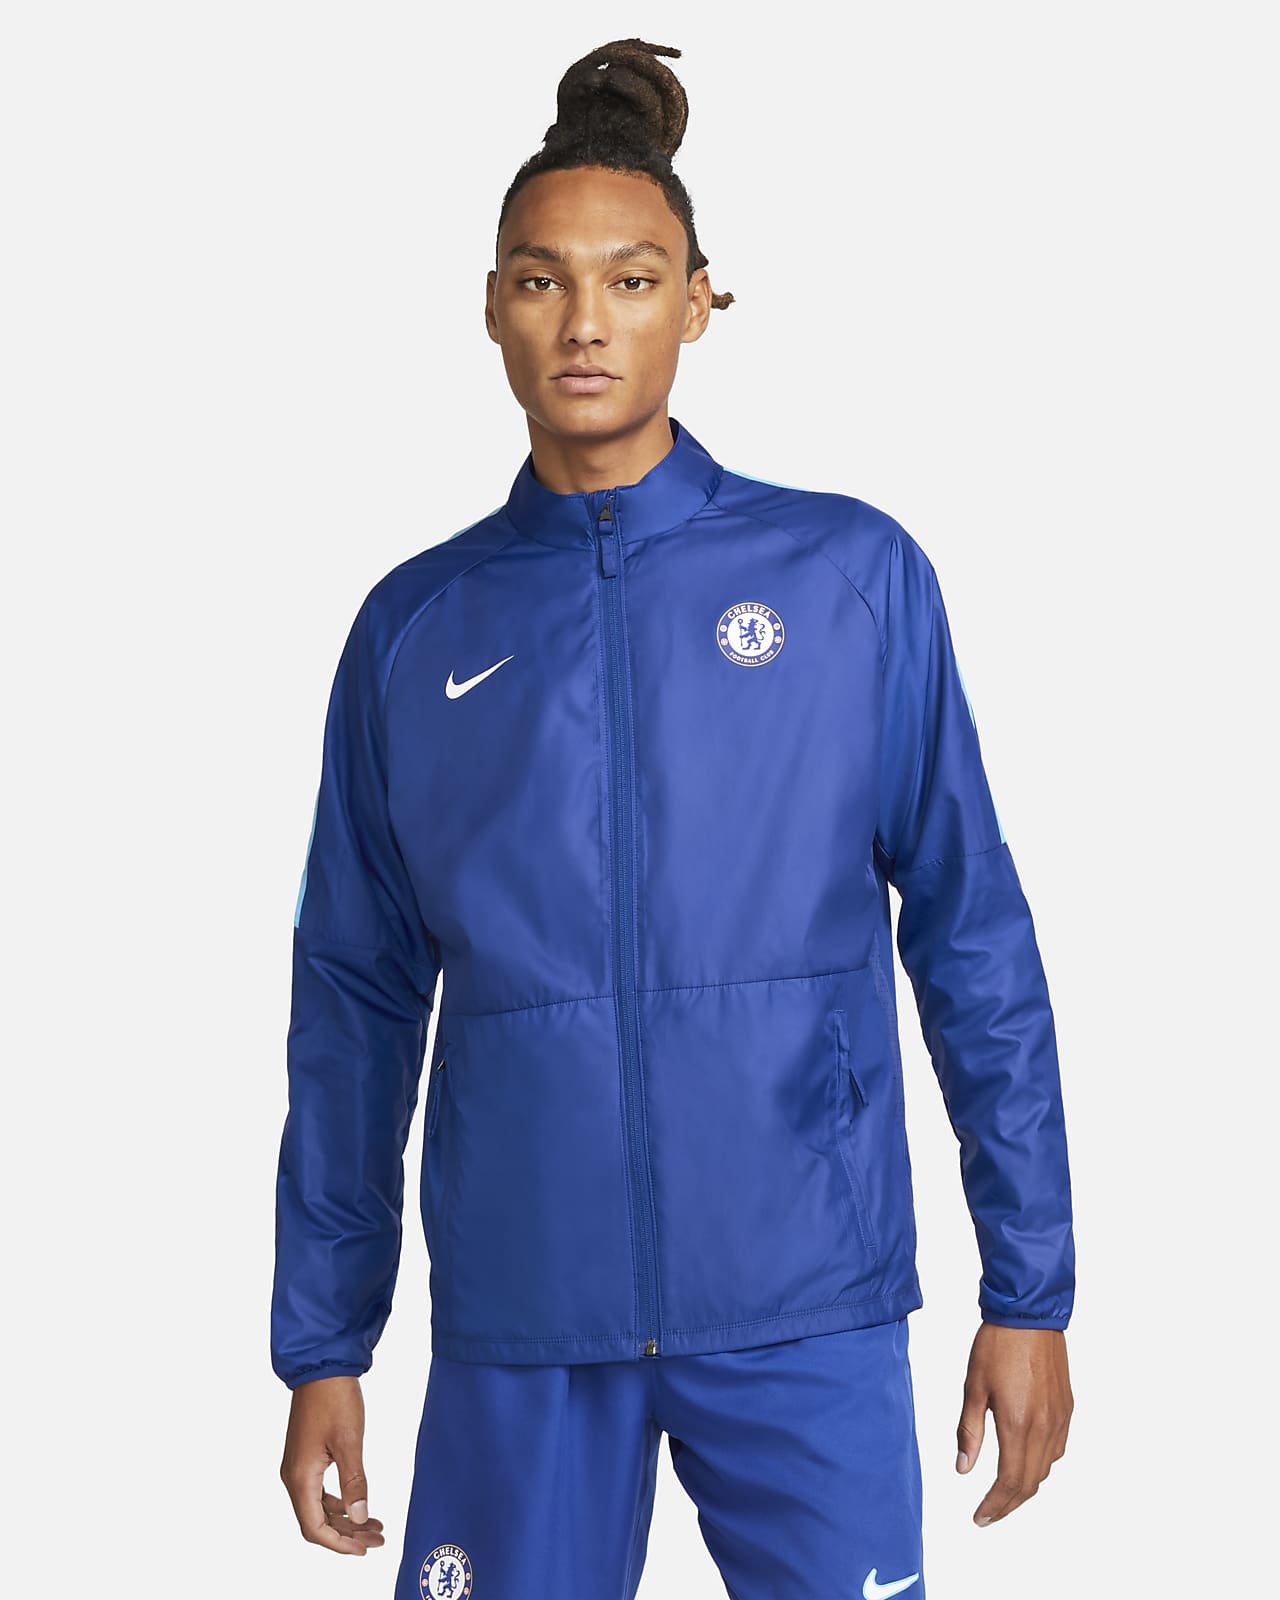 Authentication stress Word Chelsea FC Repel Academy AWF Men's Soccer Jacket. Nike.com